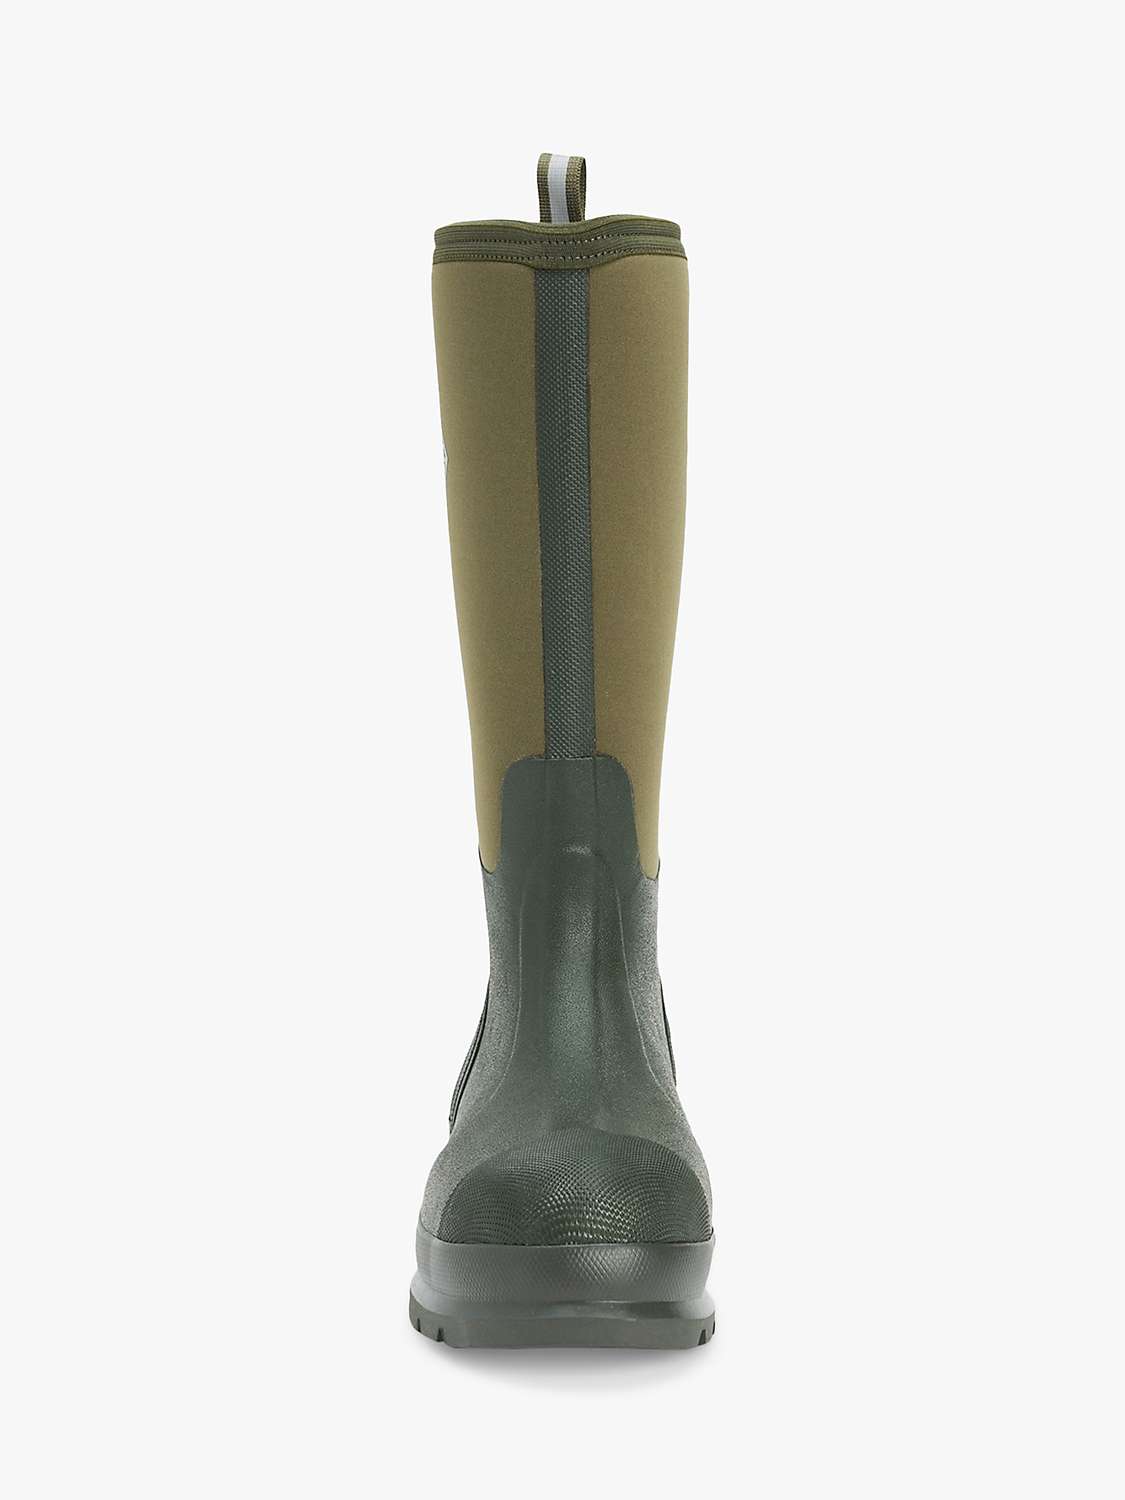 Buy Muck Chore Classic Tall Wellington Boots, Moss Online at johnlewis.com